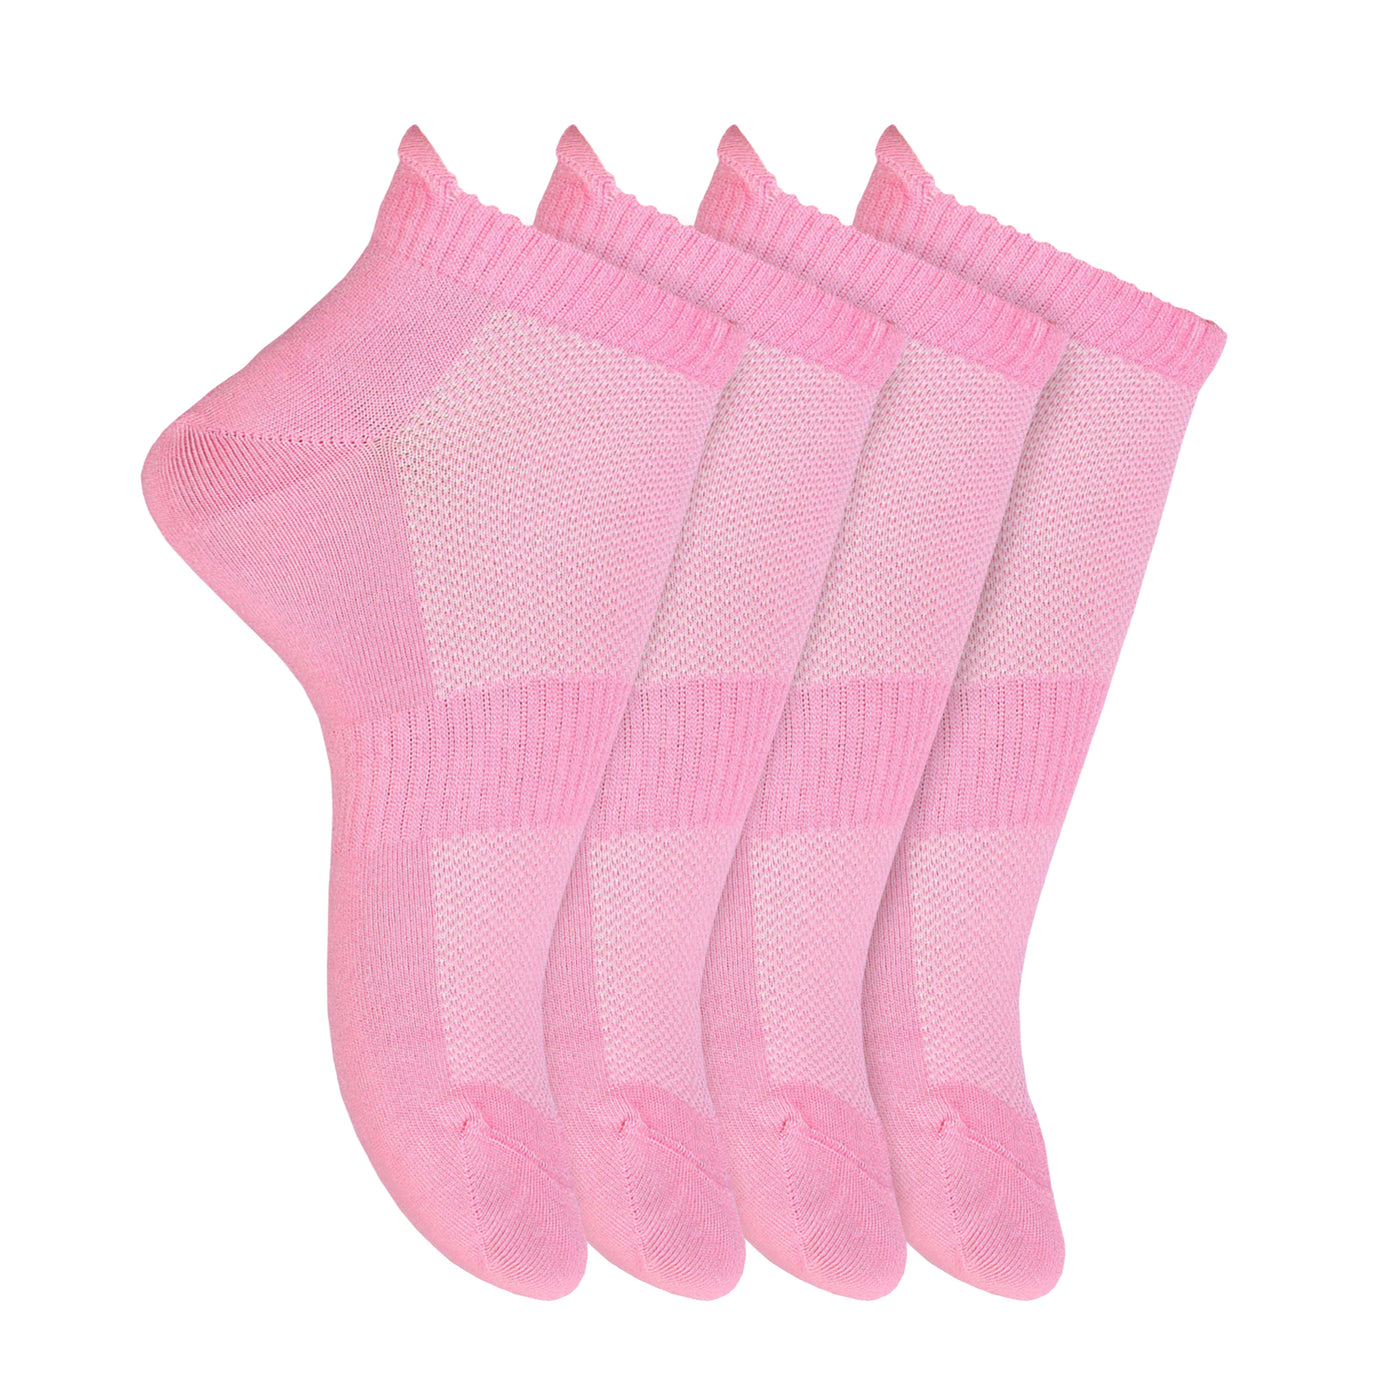 Elyfer-Pink-Bamboo-Ankle-Socks-for-Women-and-Men #color_pink